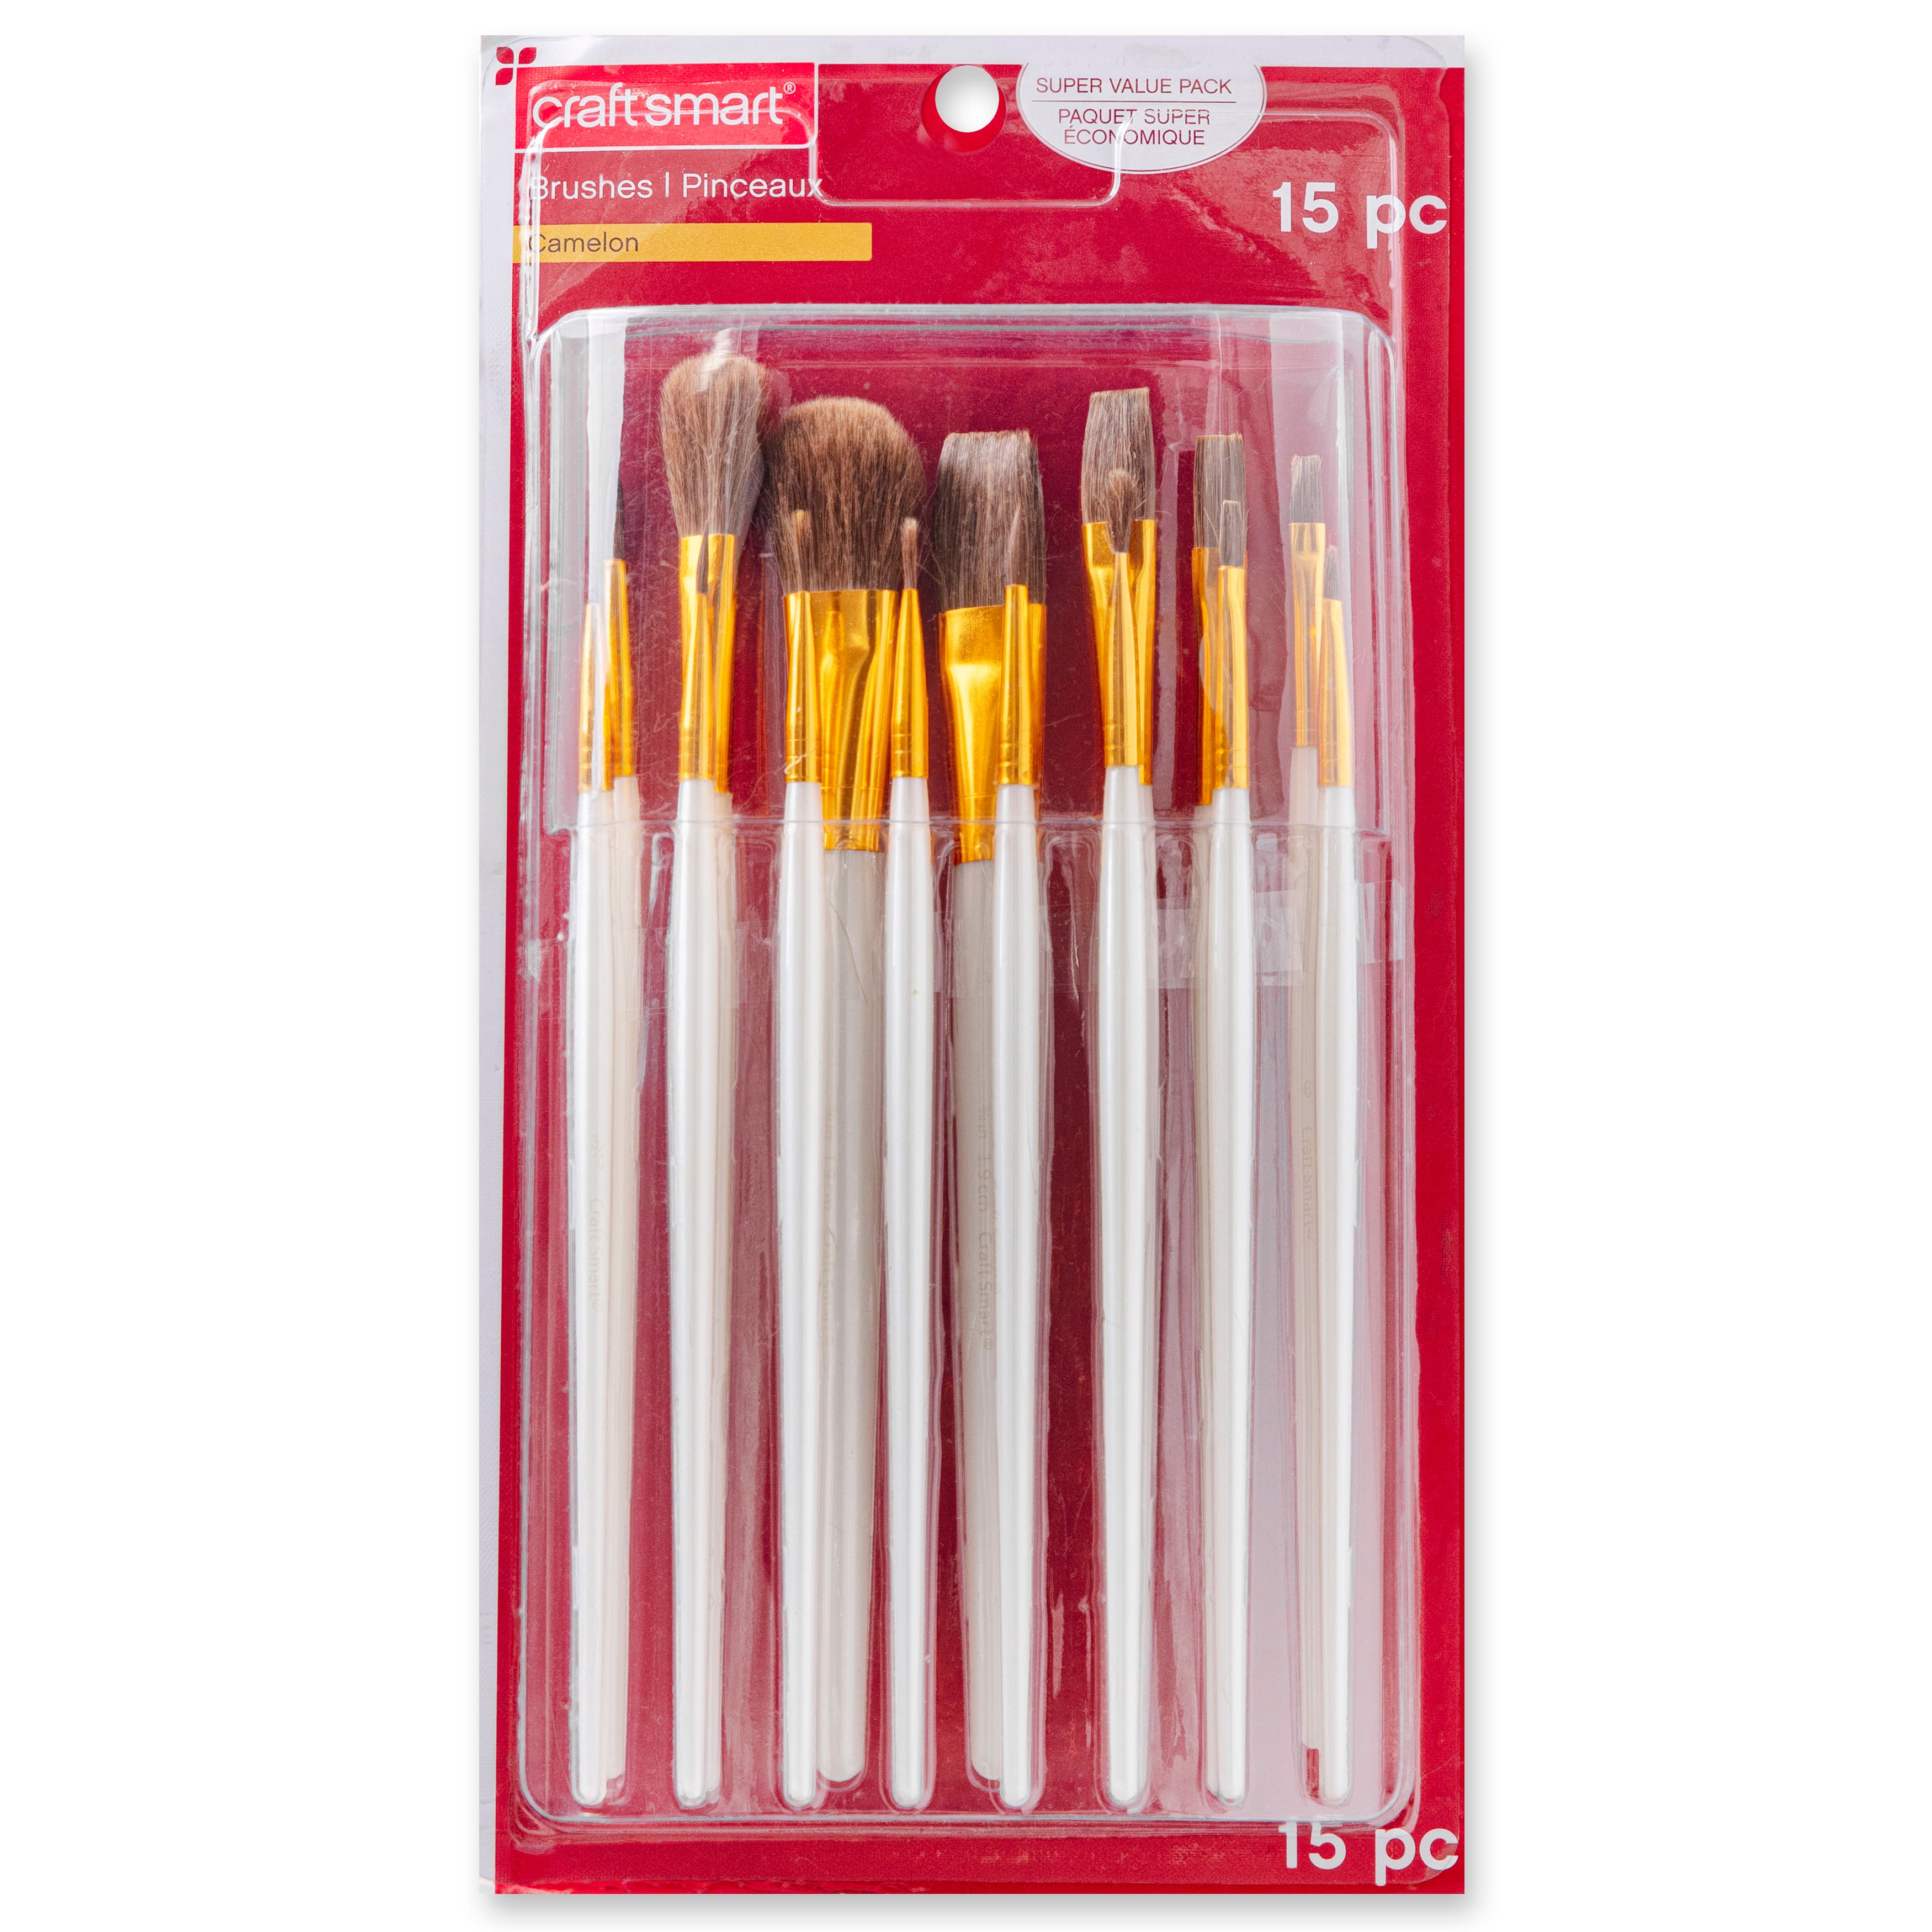 Crayola Watercolor Brush Set, Size 10, Camel-Hair Blend, Round Profile, 3/Pack